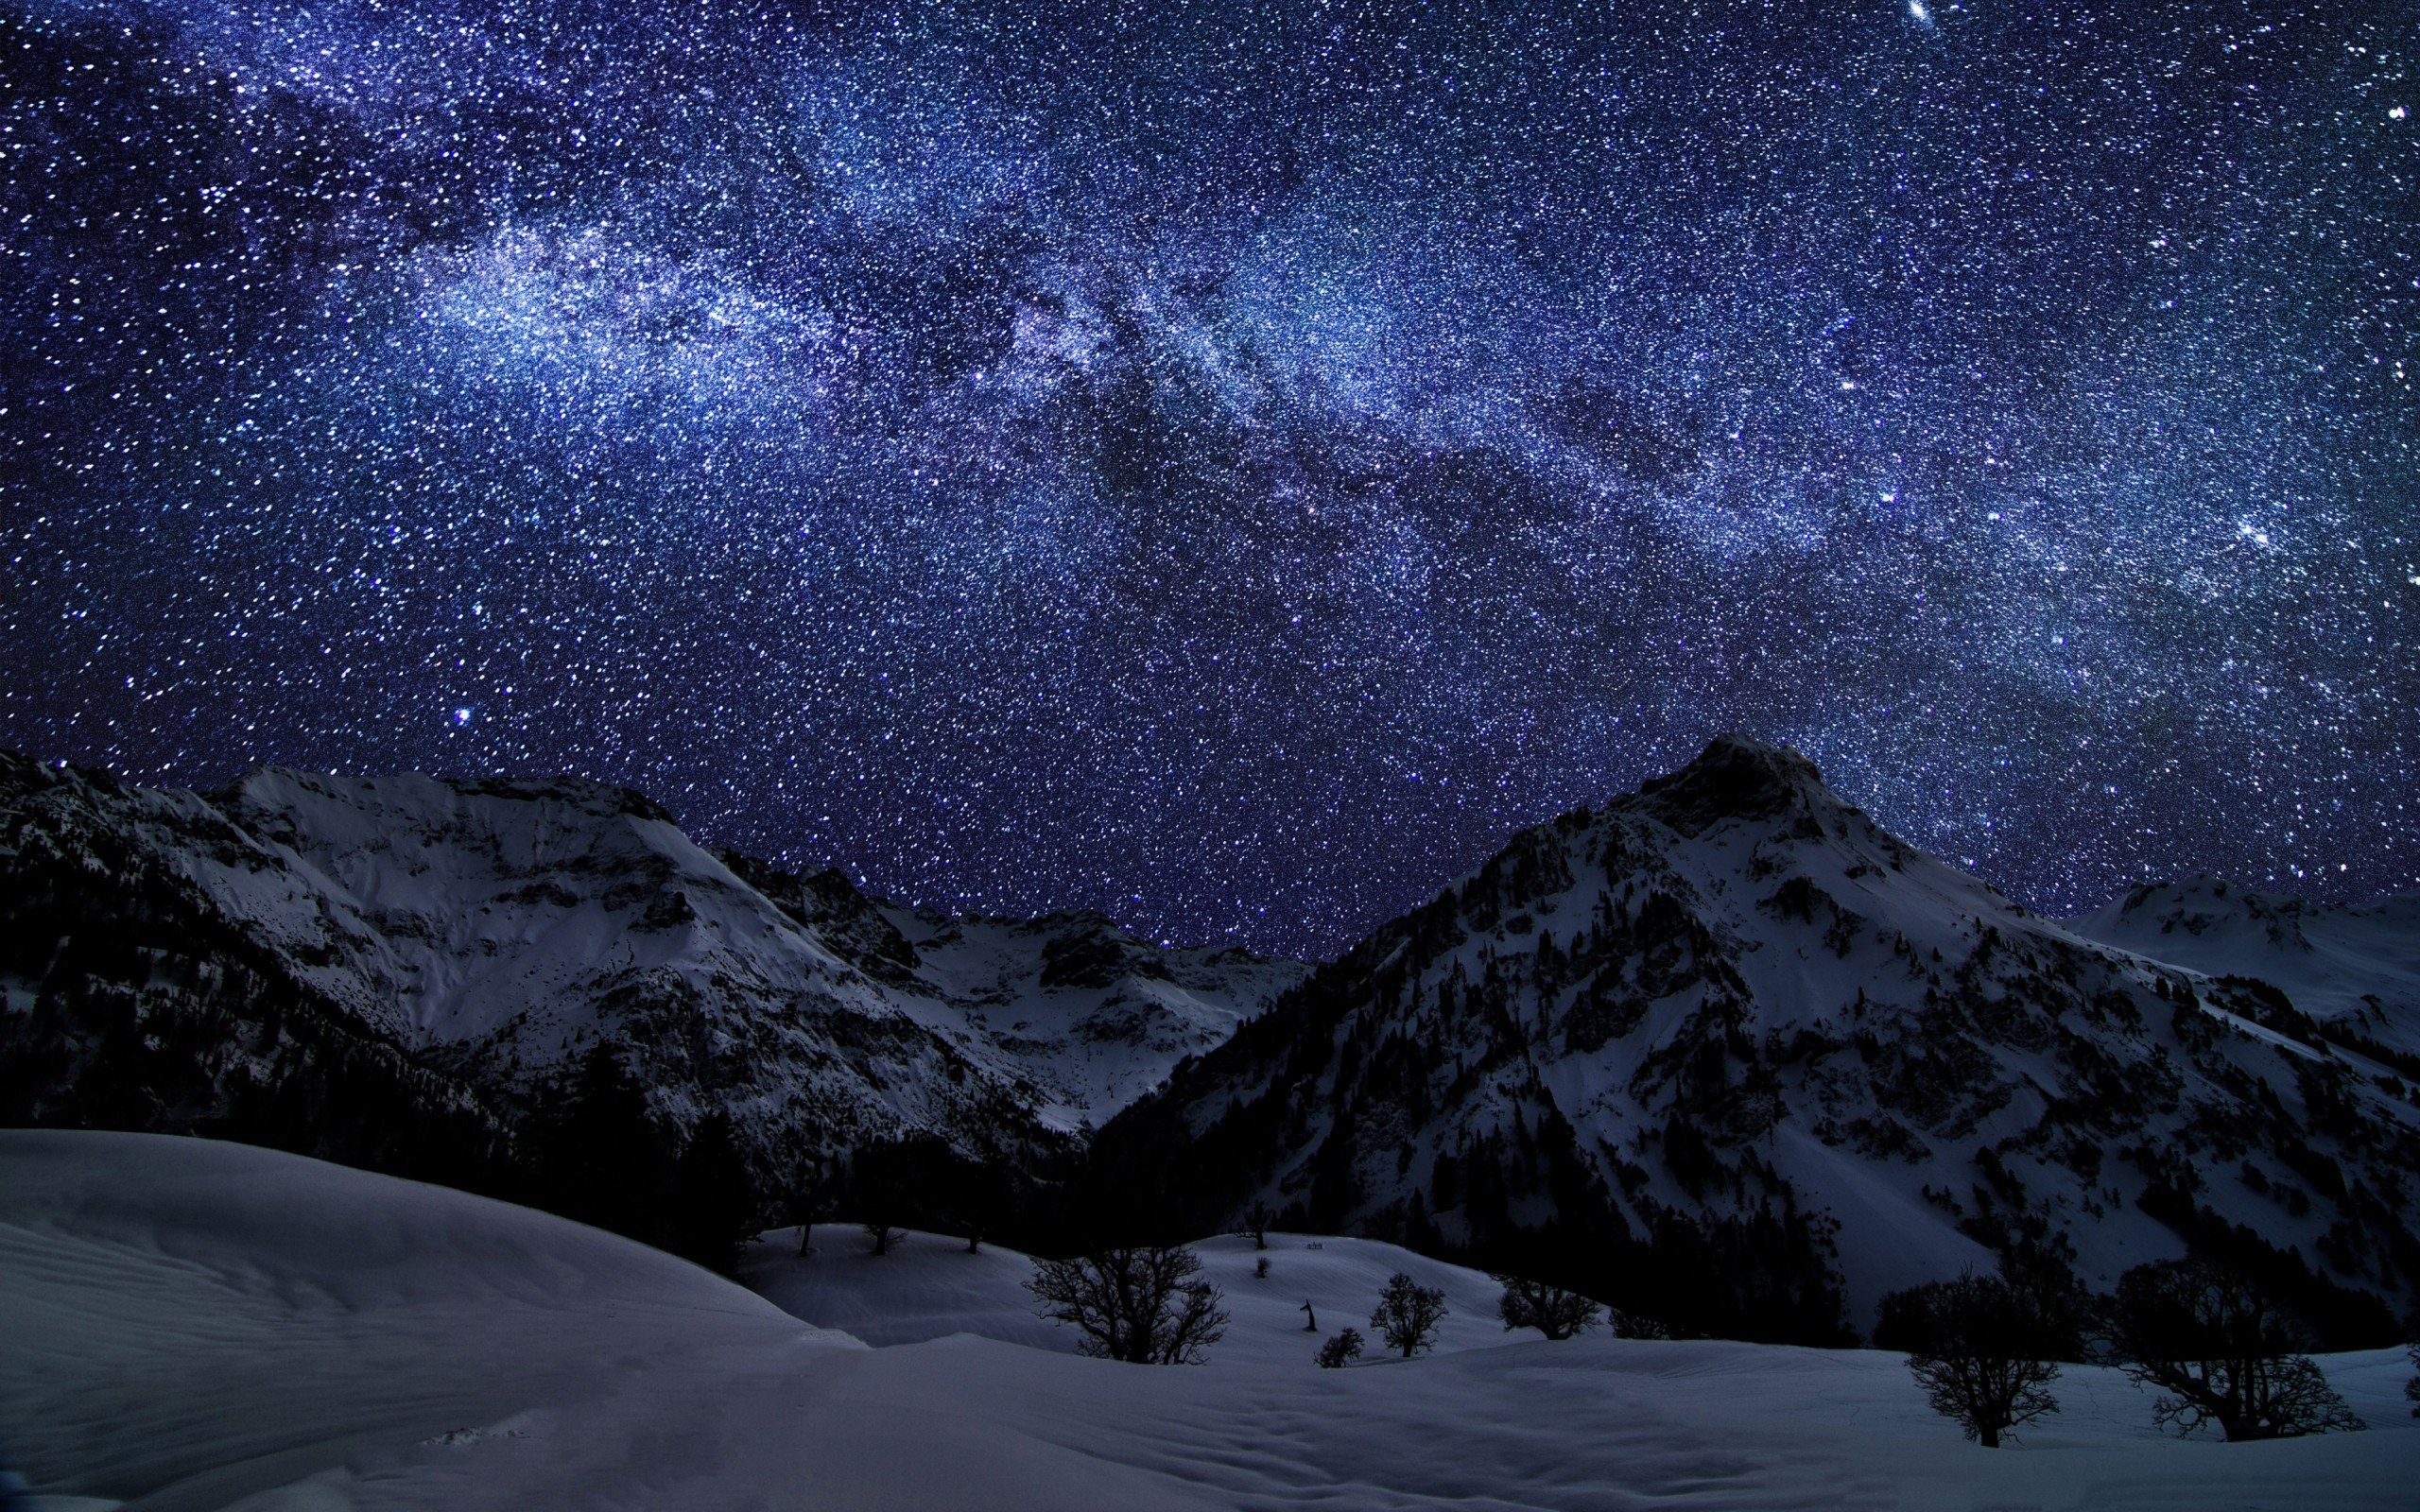 mountains, Landscapes, Nature, Winter, Snow, Night, Stars, Galaxies, Germany, Bavaria, Long, Exposure, Milky, Way, Hdr, Photography Wallpaper